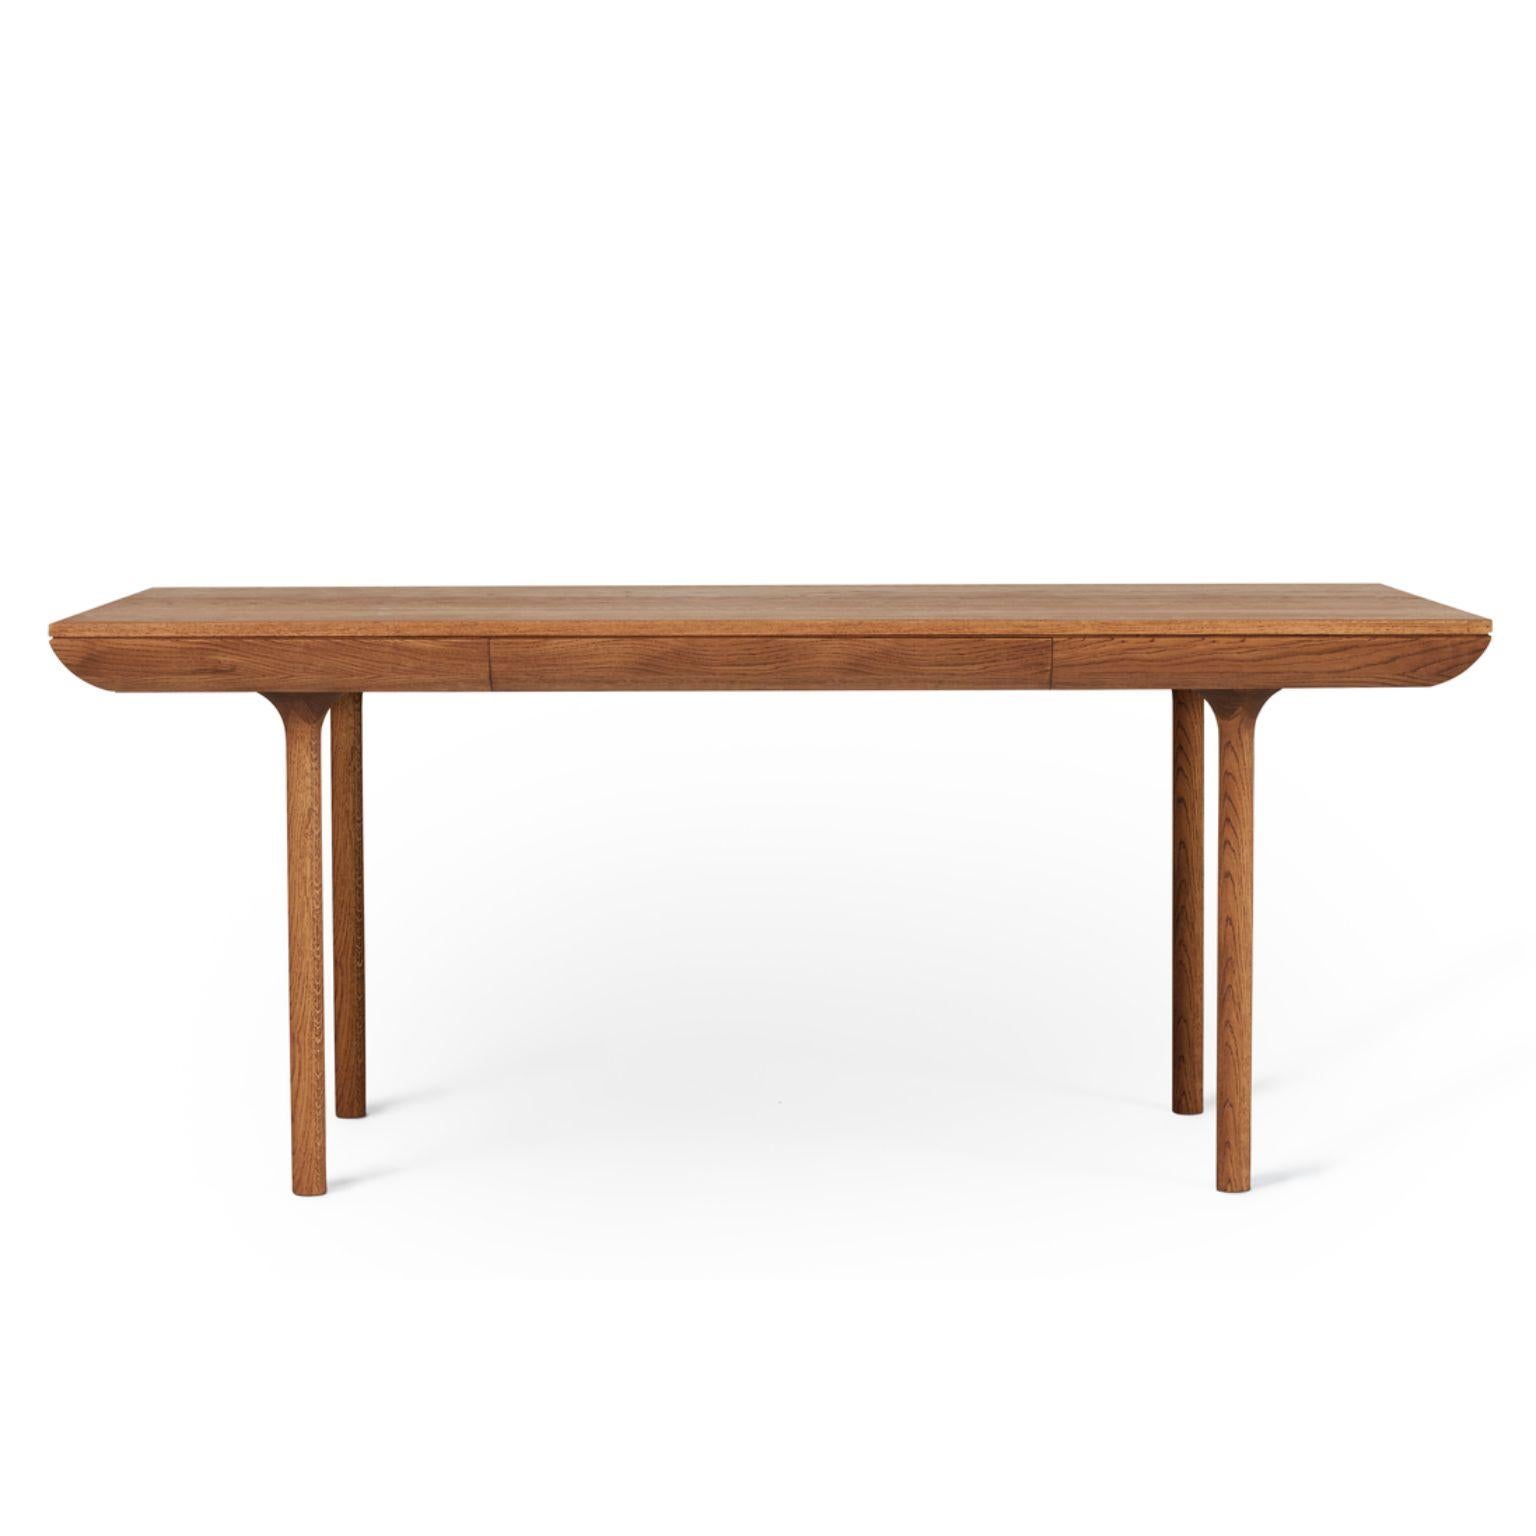 Rúna teak oiled oak dining table by Warm Nordic
Dimensions: D 180 x W 90 x H 74 cm
Material: Teak oiled solid oak
Weight: 47 kg
Also available in different finishes.

Timeless dining table with a poetic idiom and a neat little drawer. With its